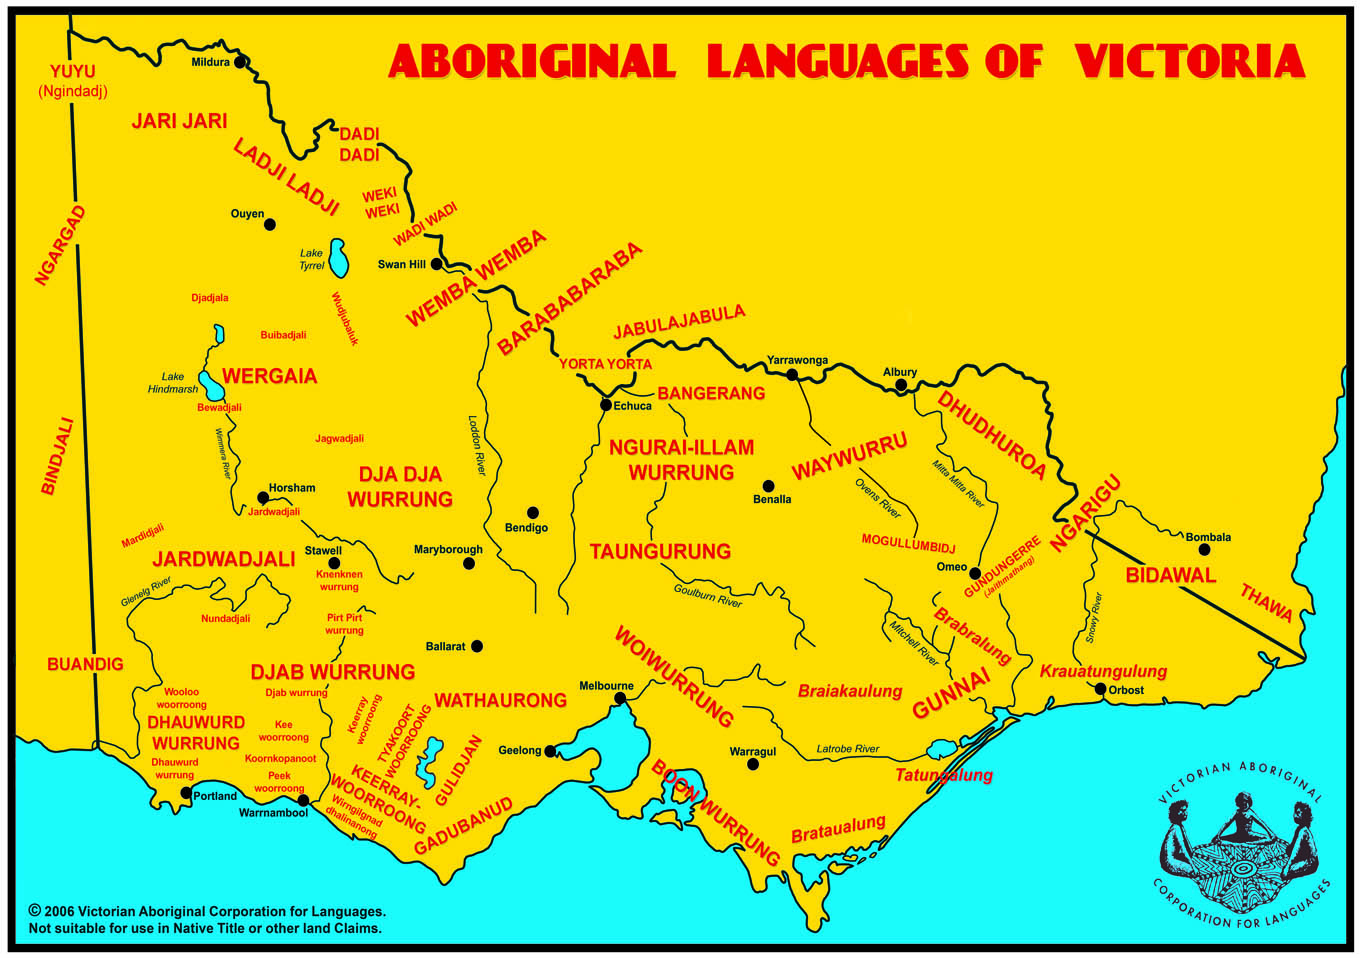 Victorian Aboriginal Corporations for Languages Map. The map shows the complex geography relation to Aboriginal languages in Victoria. The image states it is "Copyright 2006 by the Victorian Aboriginal Corporation for Languages. Not suitable for use in Native Title or other land Claims."